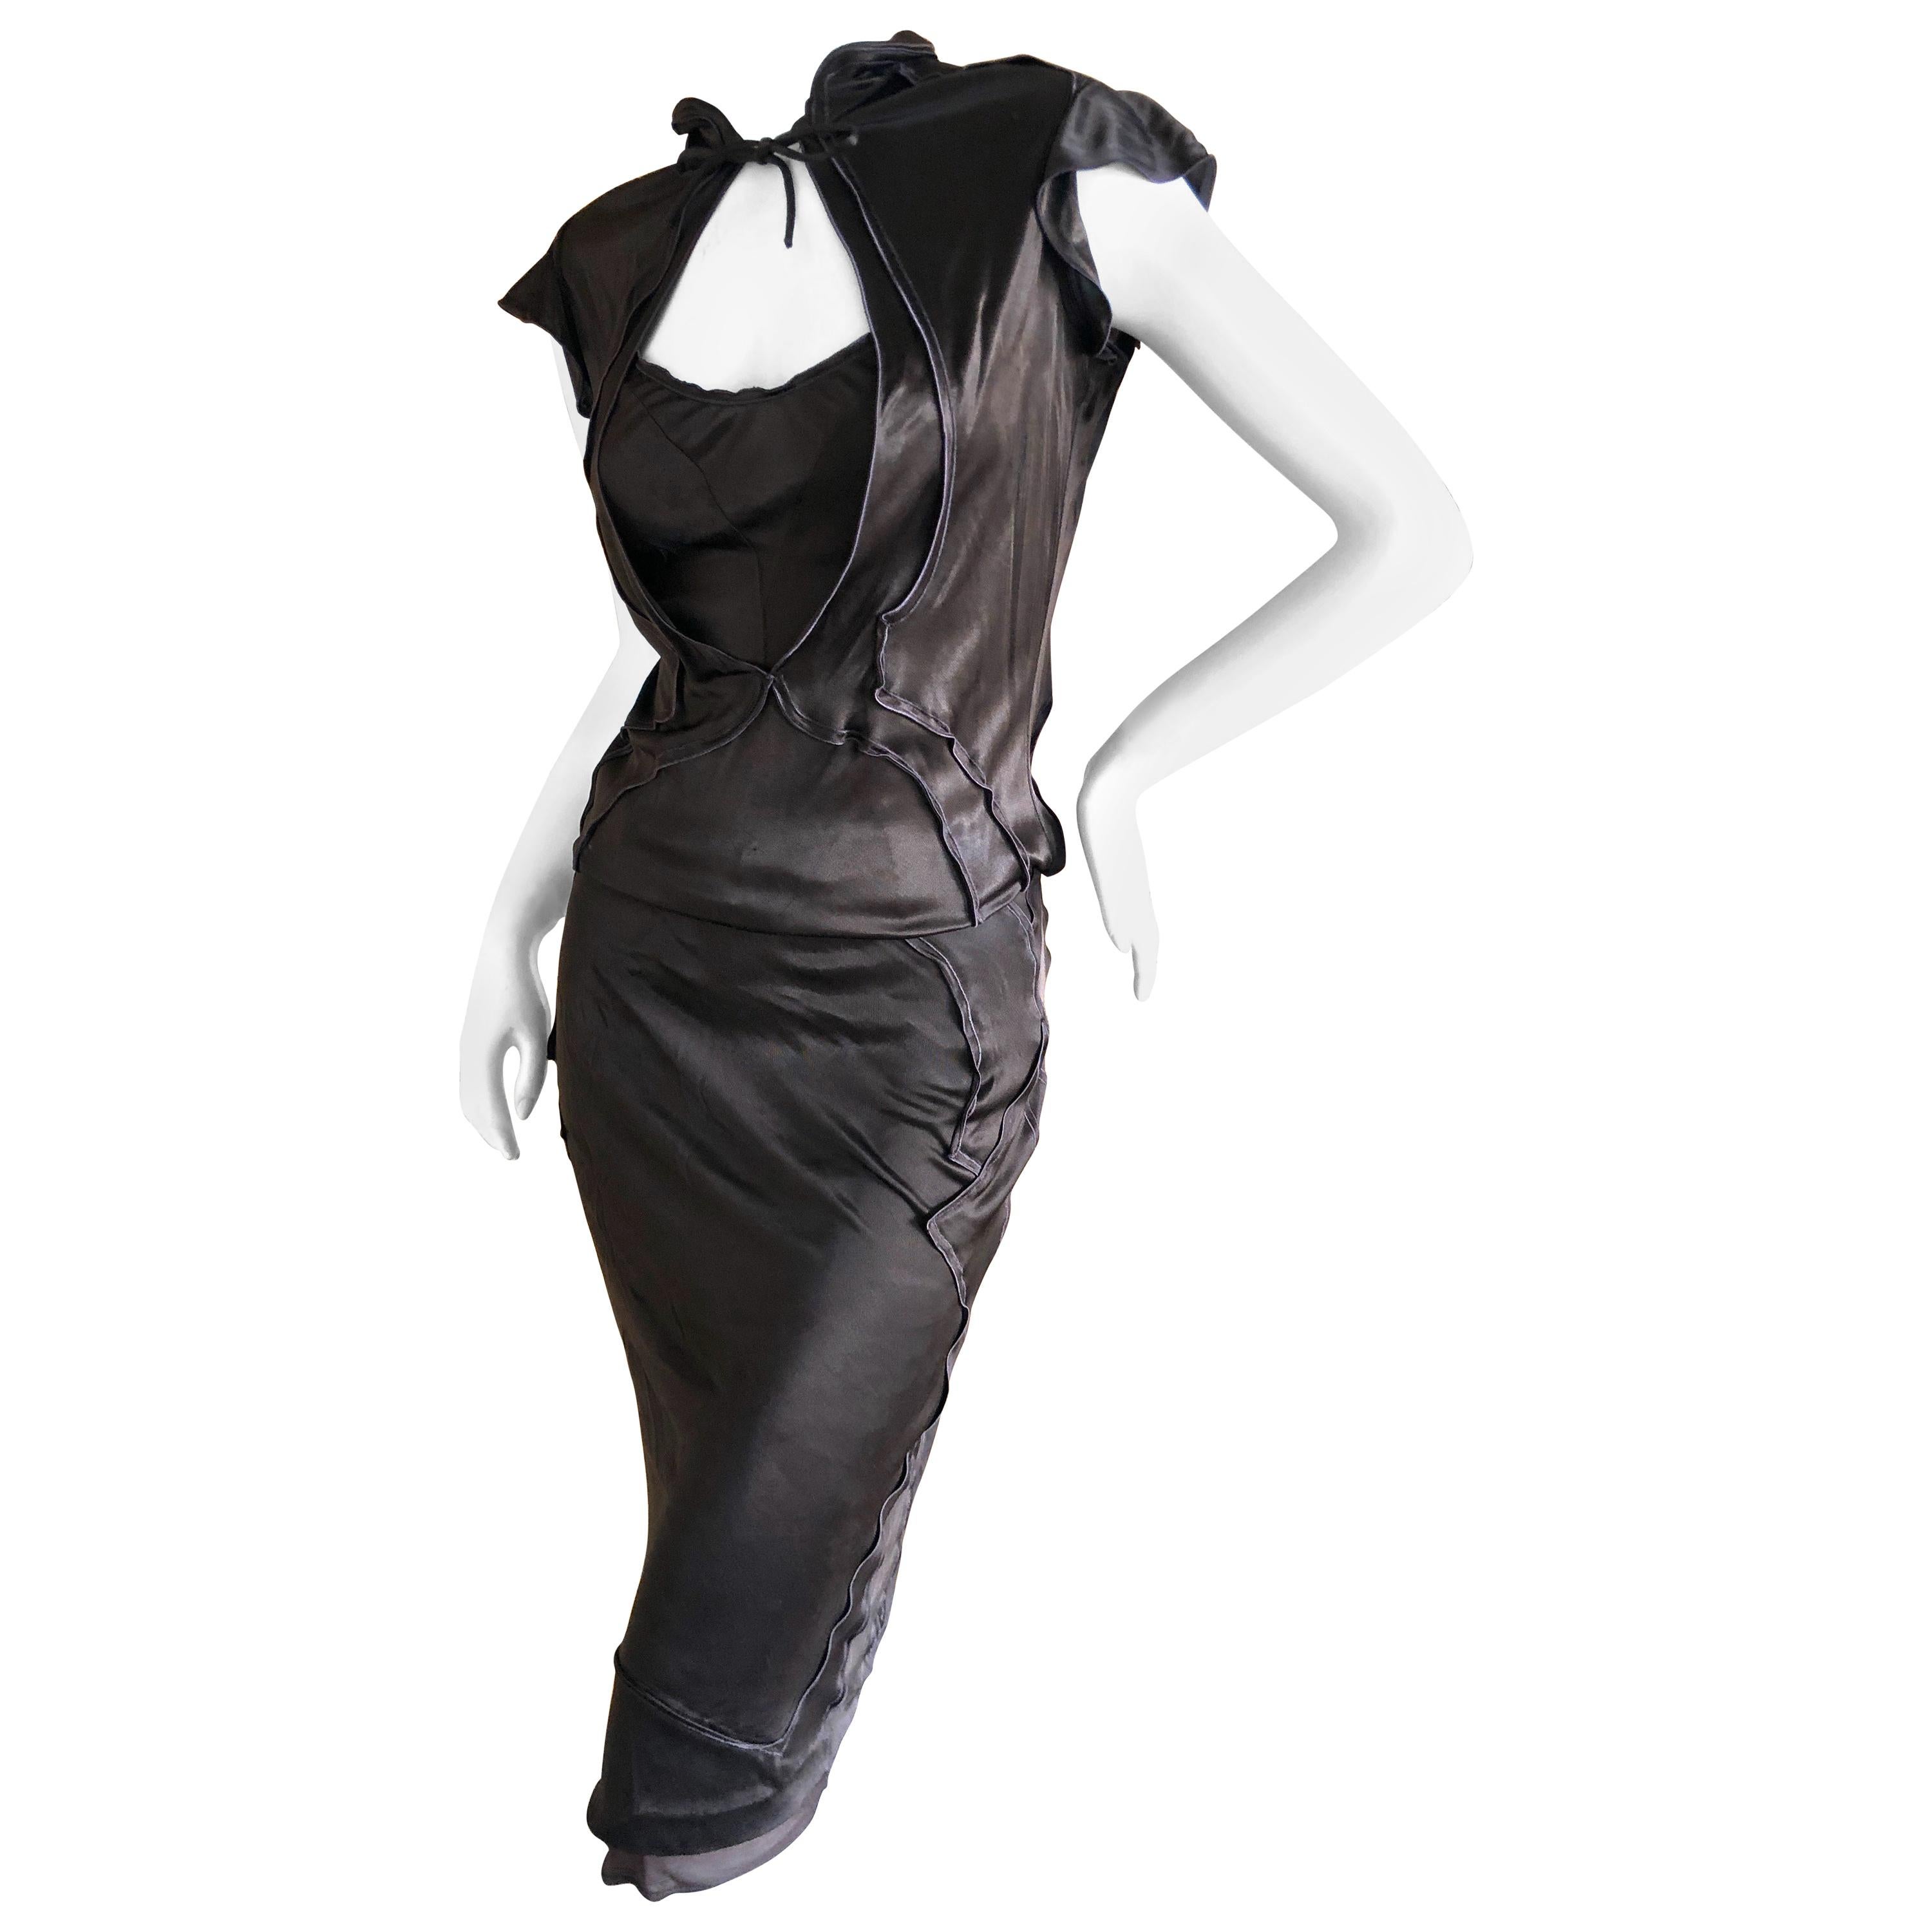 Yves Saint Laurent by Tom Ford Two Piece Silk Dress Set from Fall 2004 For Sale